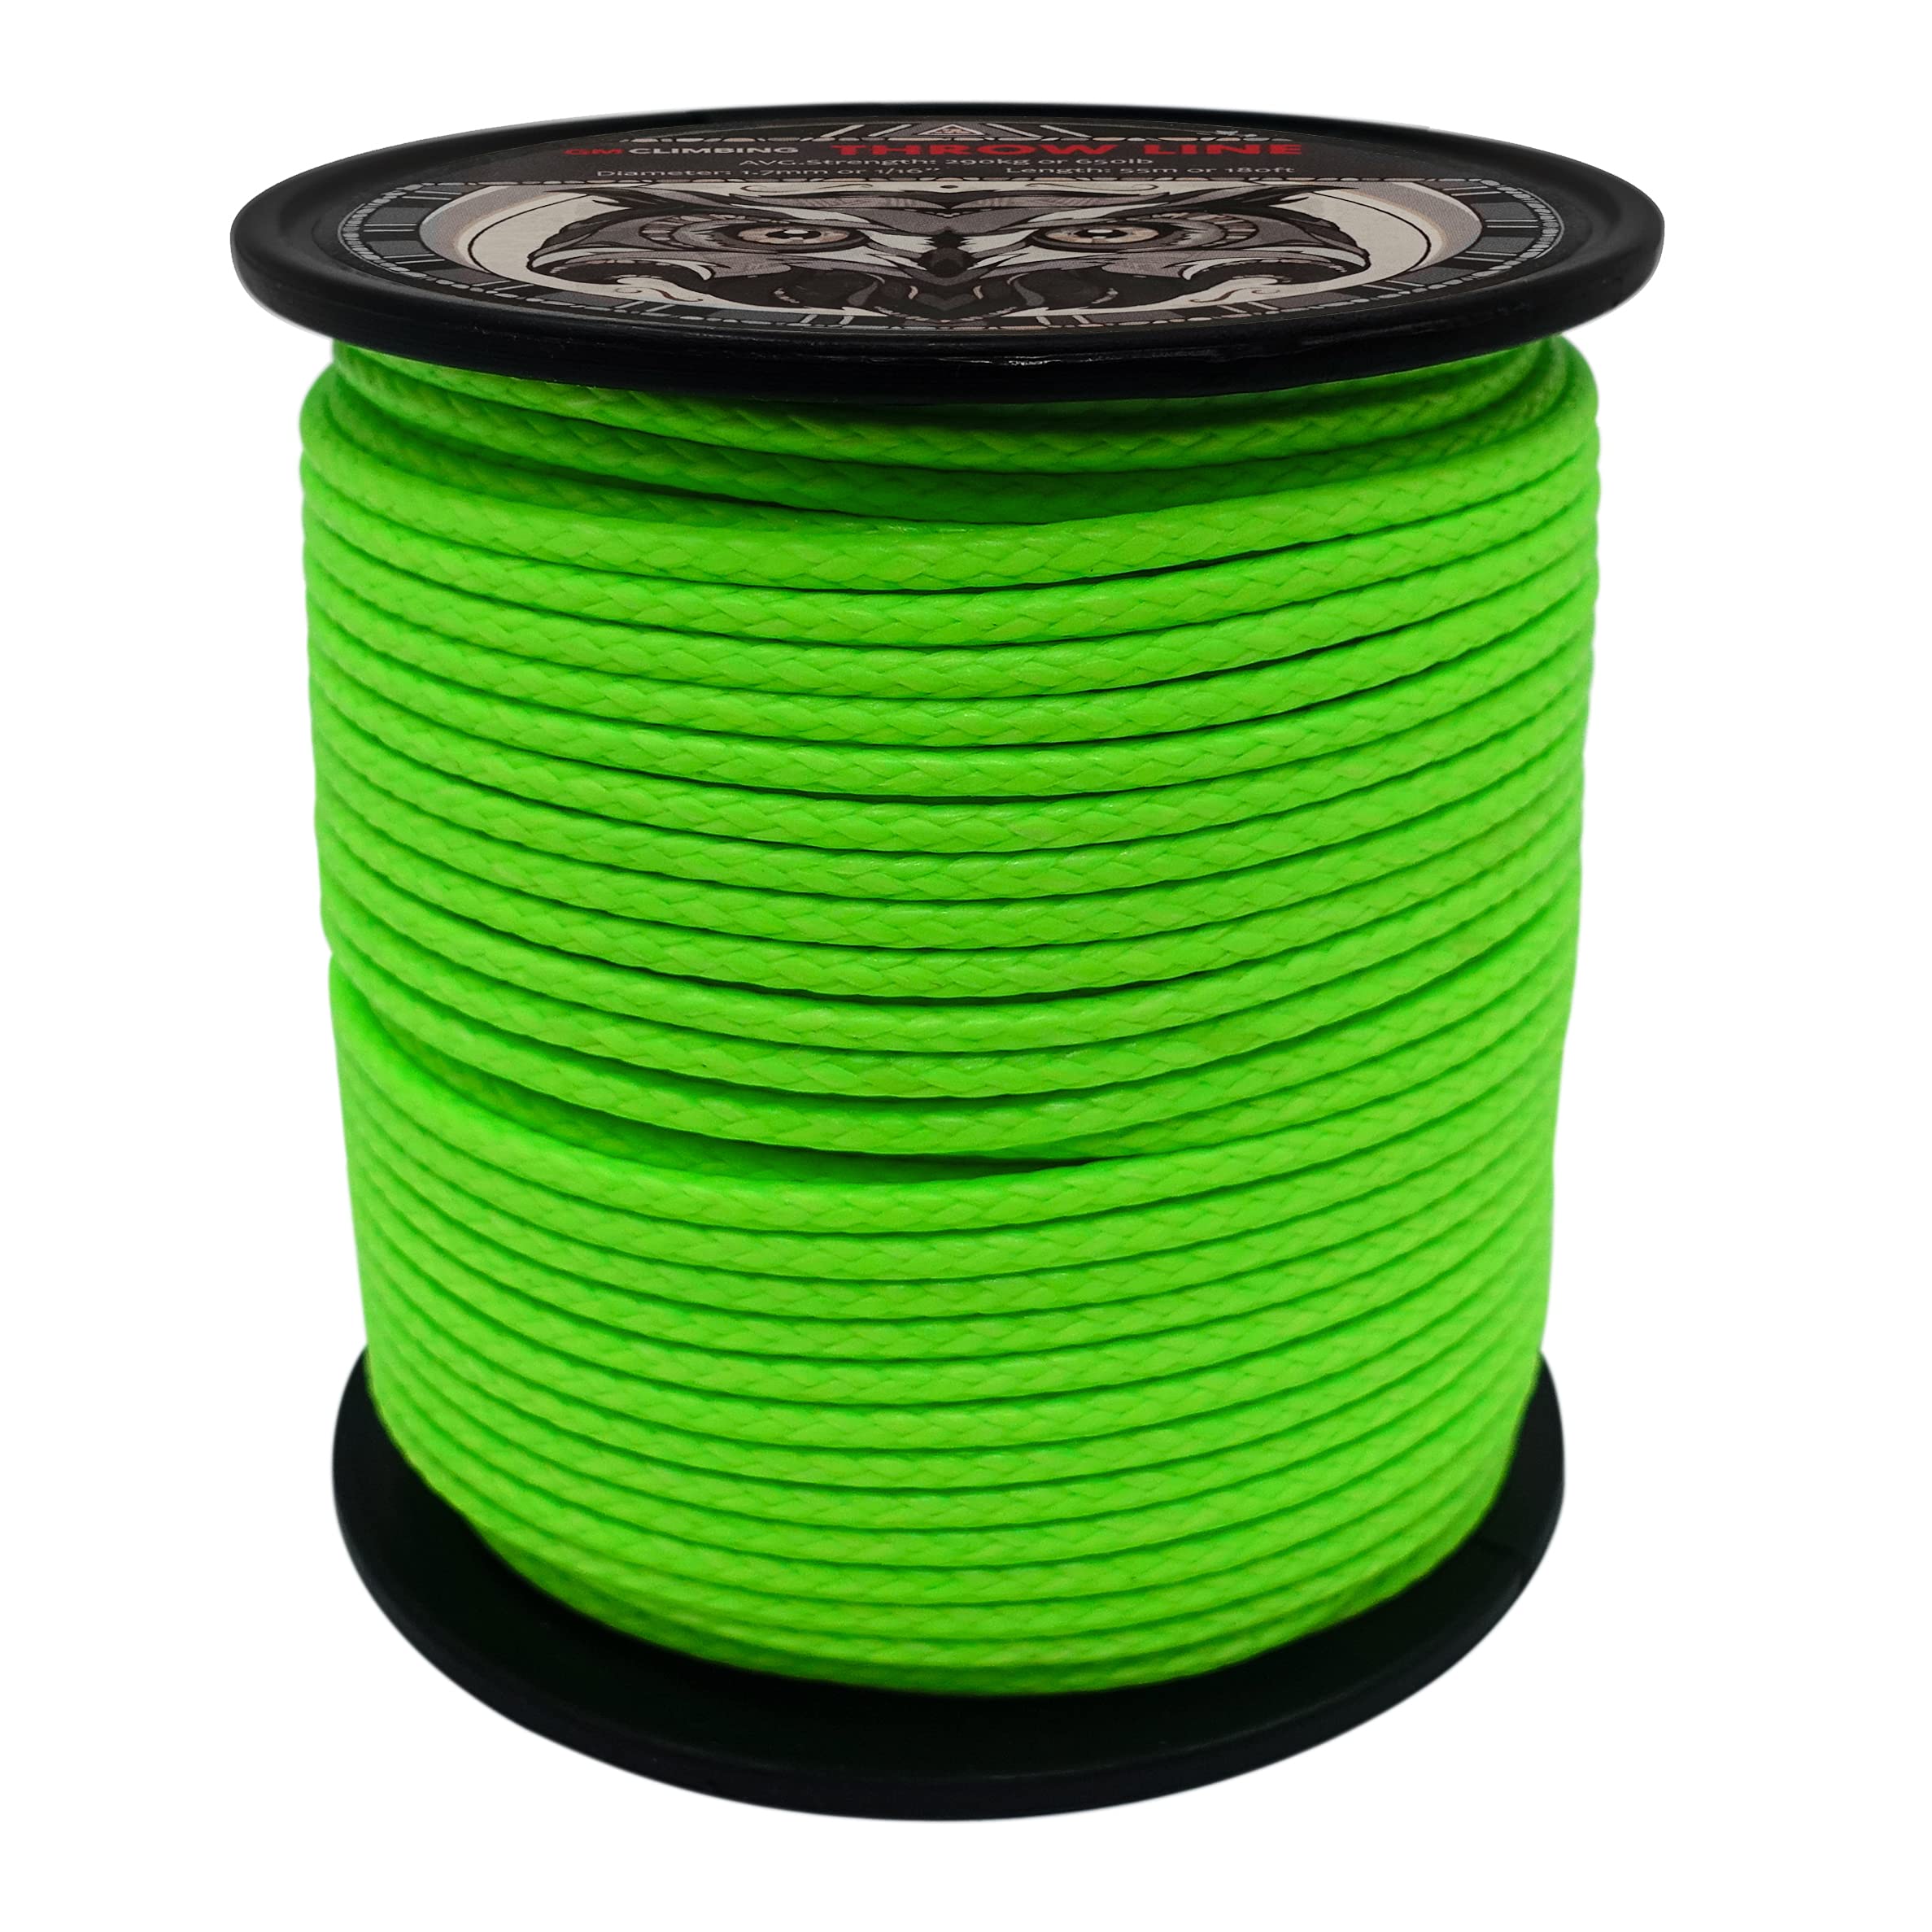 GM CLIMBING Throw Line180Ft Roll UHMWPE Cord High Strength for